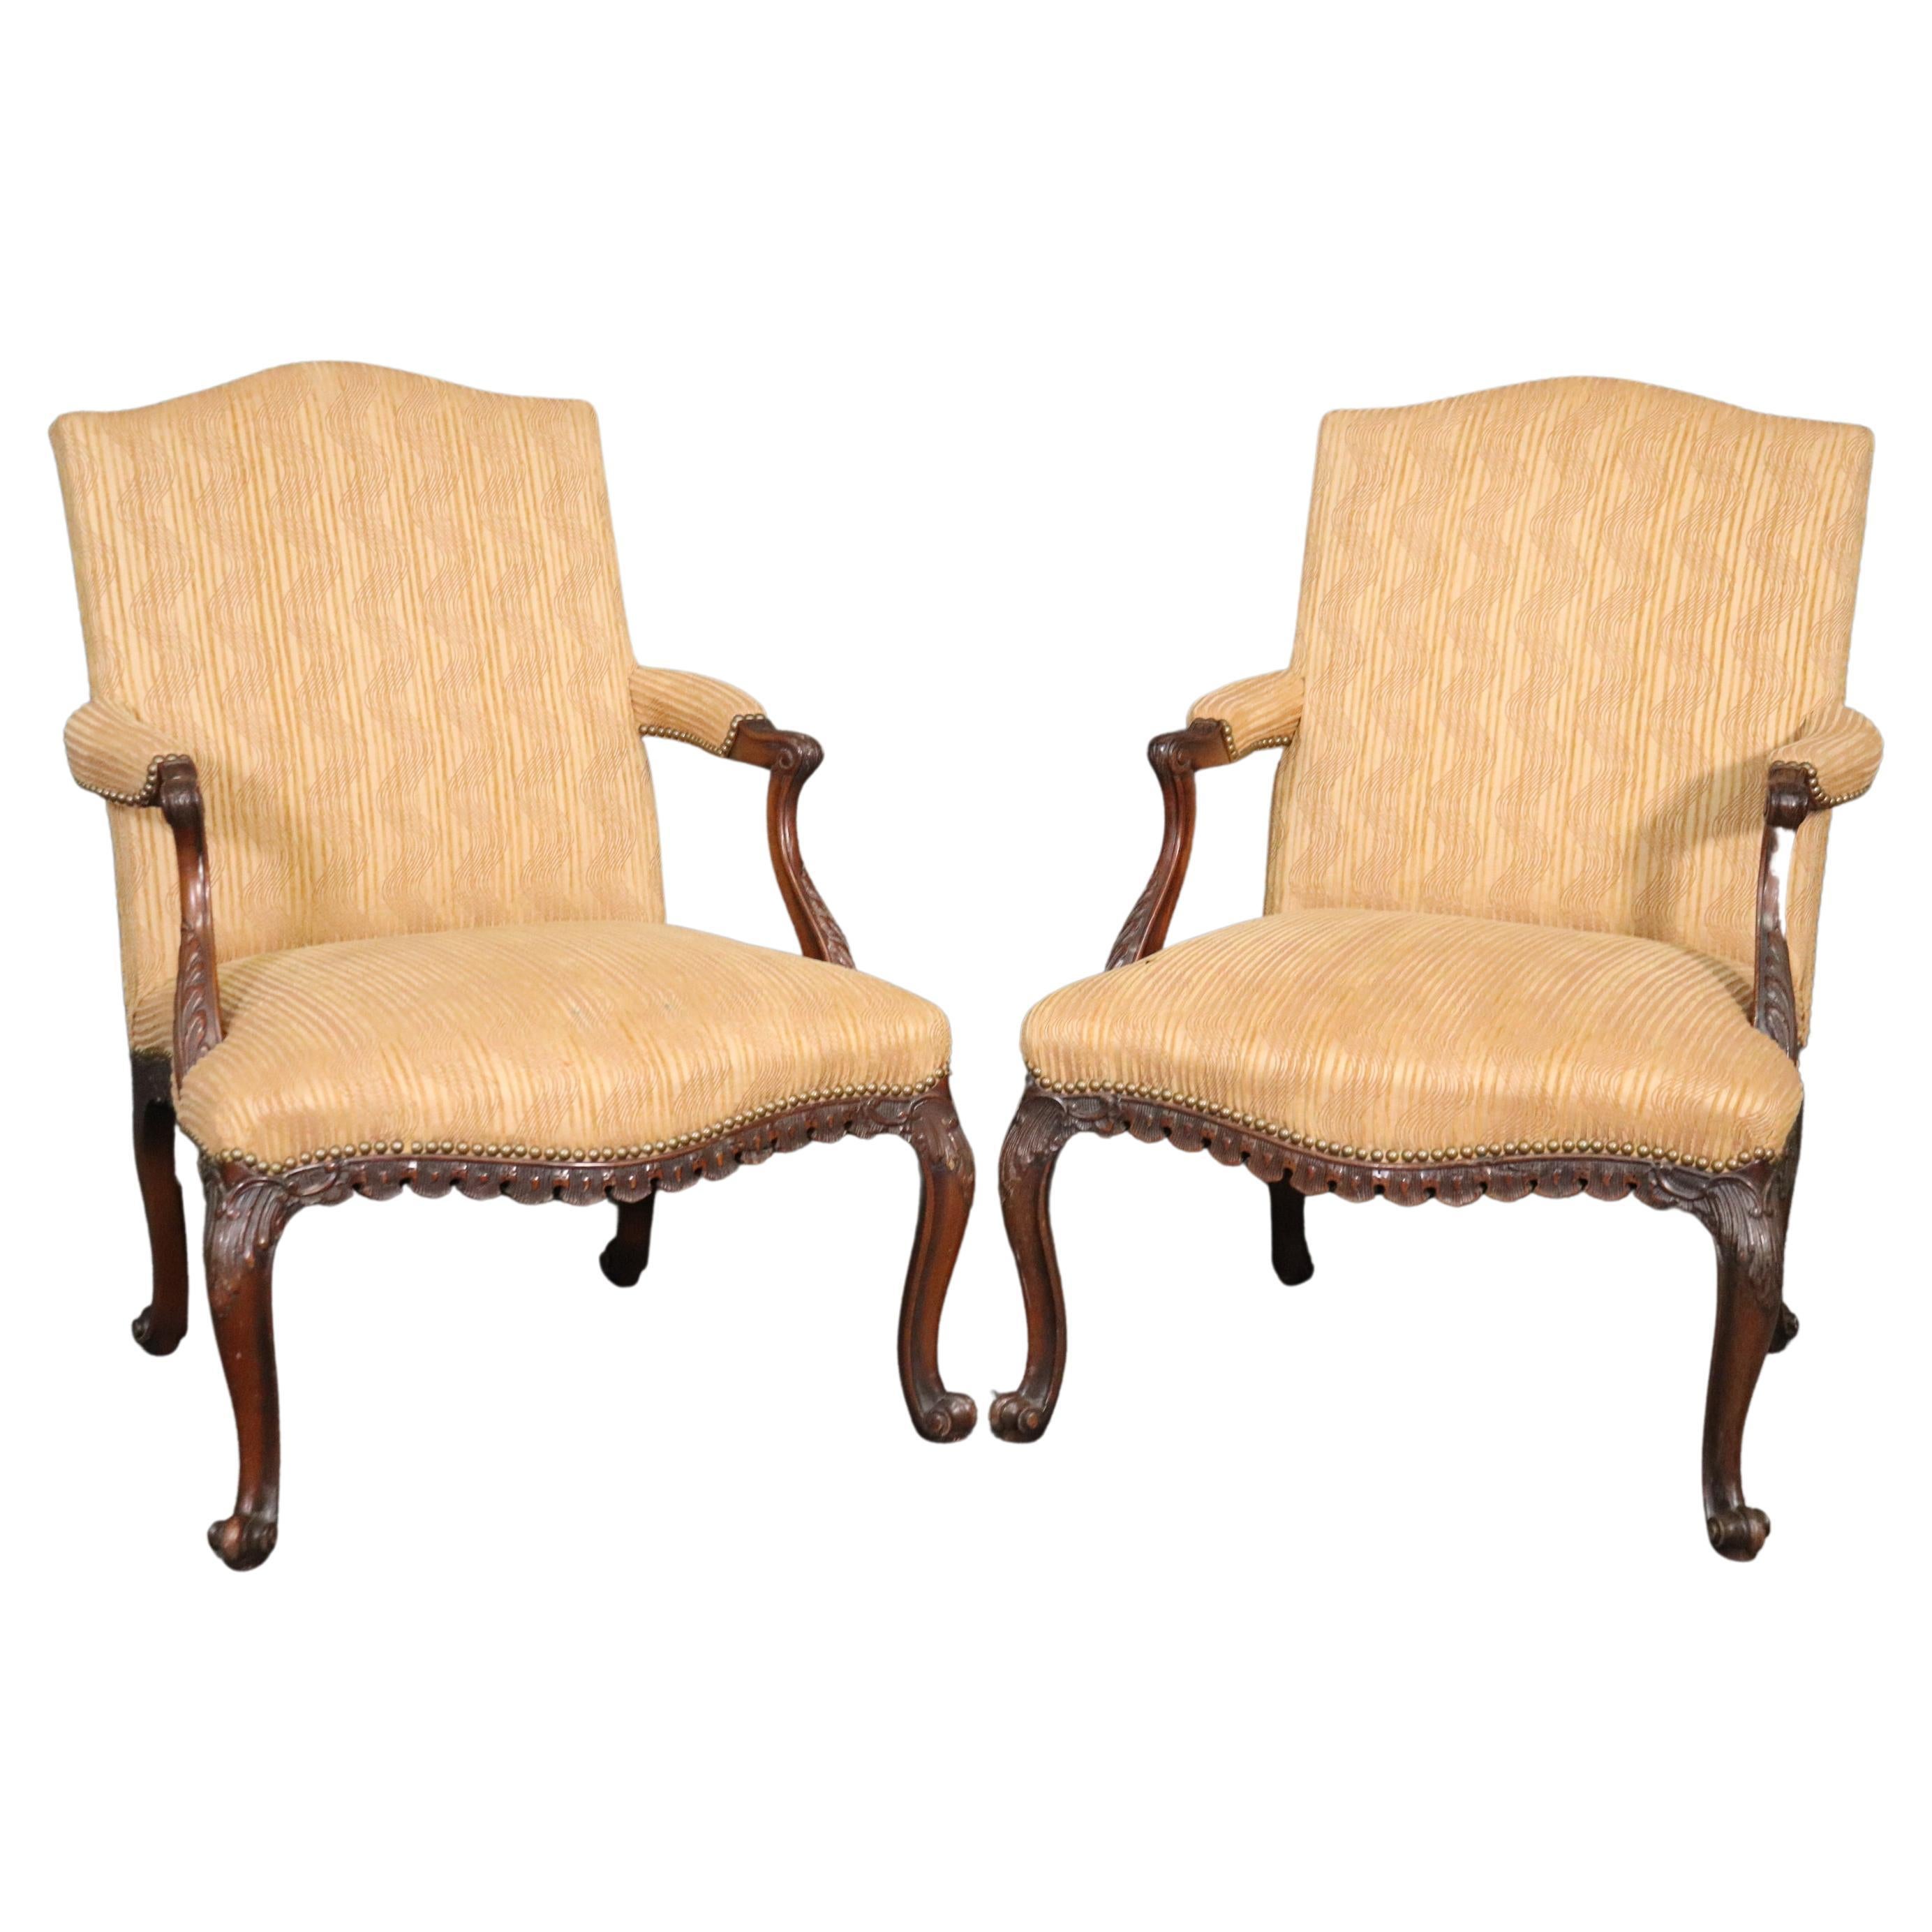 Pair of English Georgian Carved Mahogany Armchairs, Circa 1940s For Sale